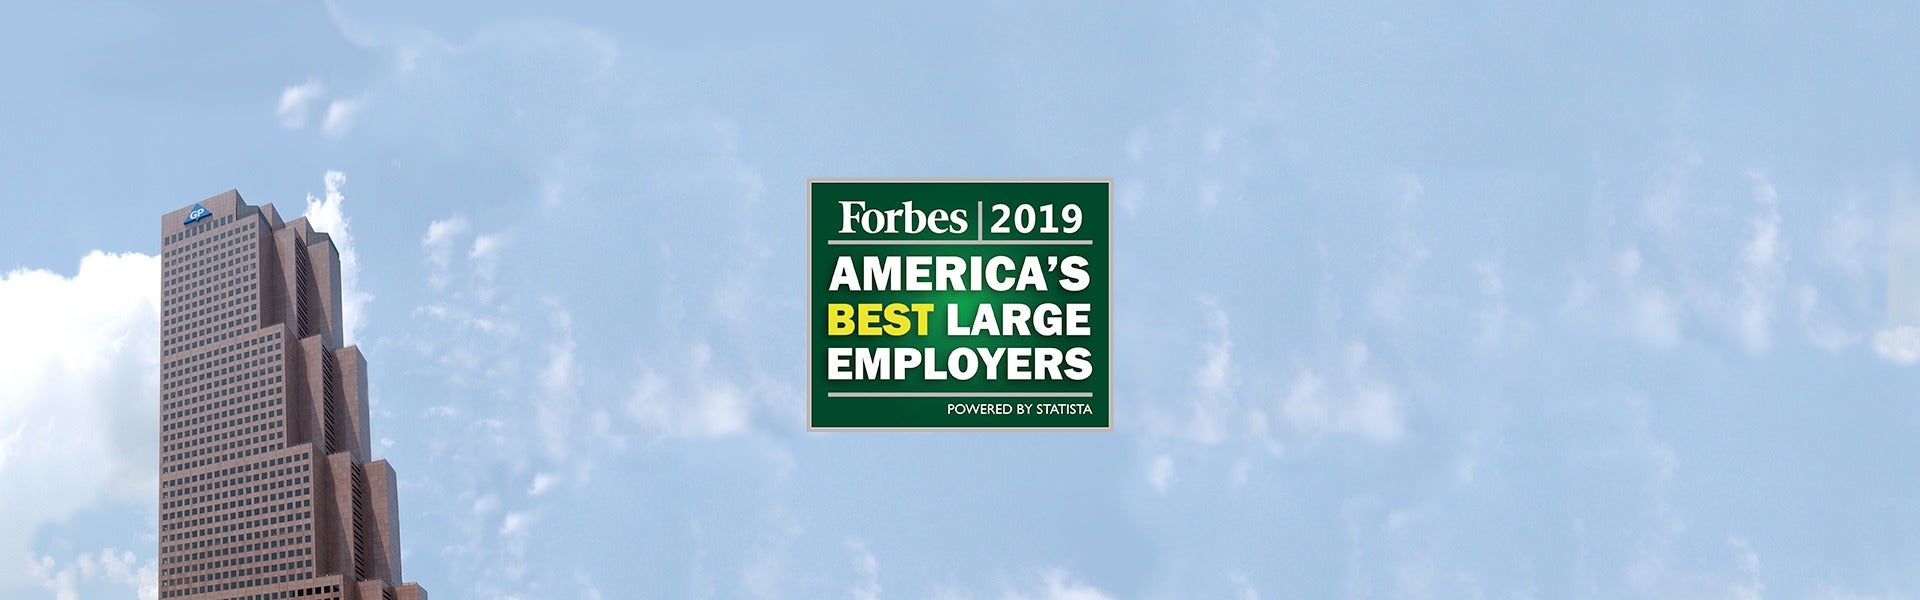 GP Named One of America's Best Large Employers By Forbes